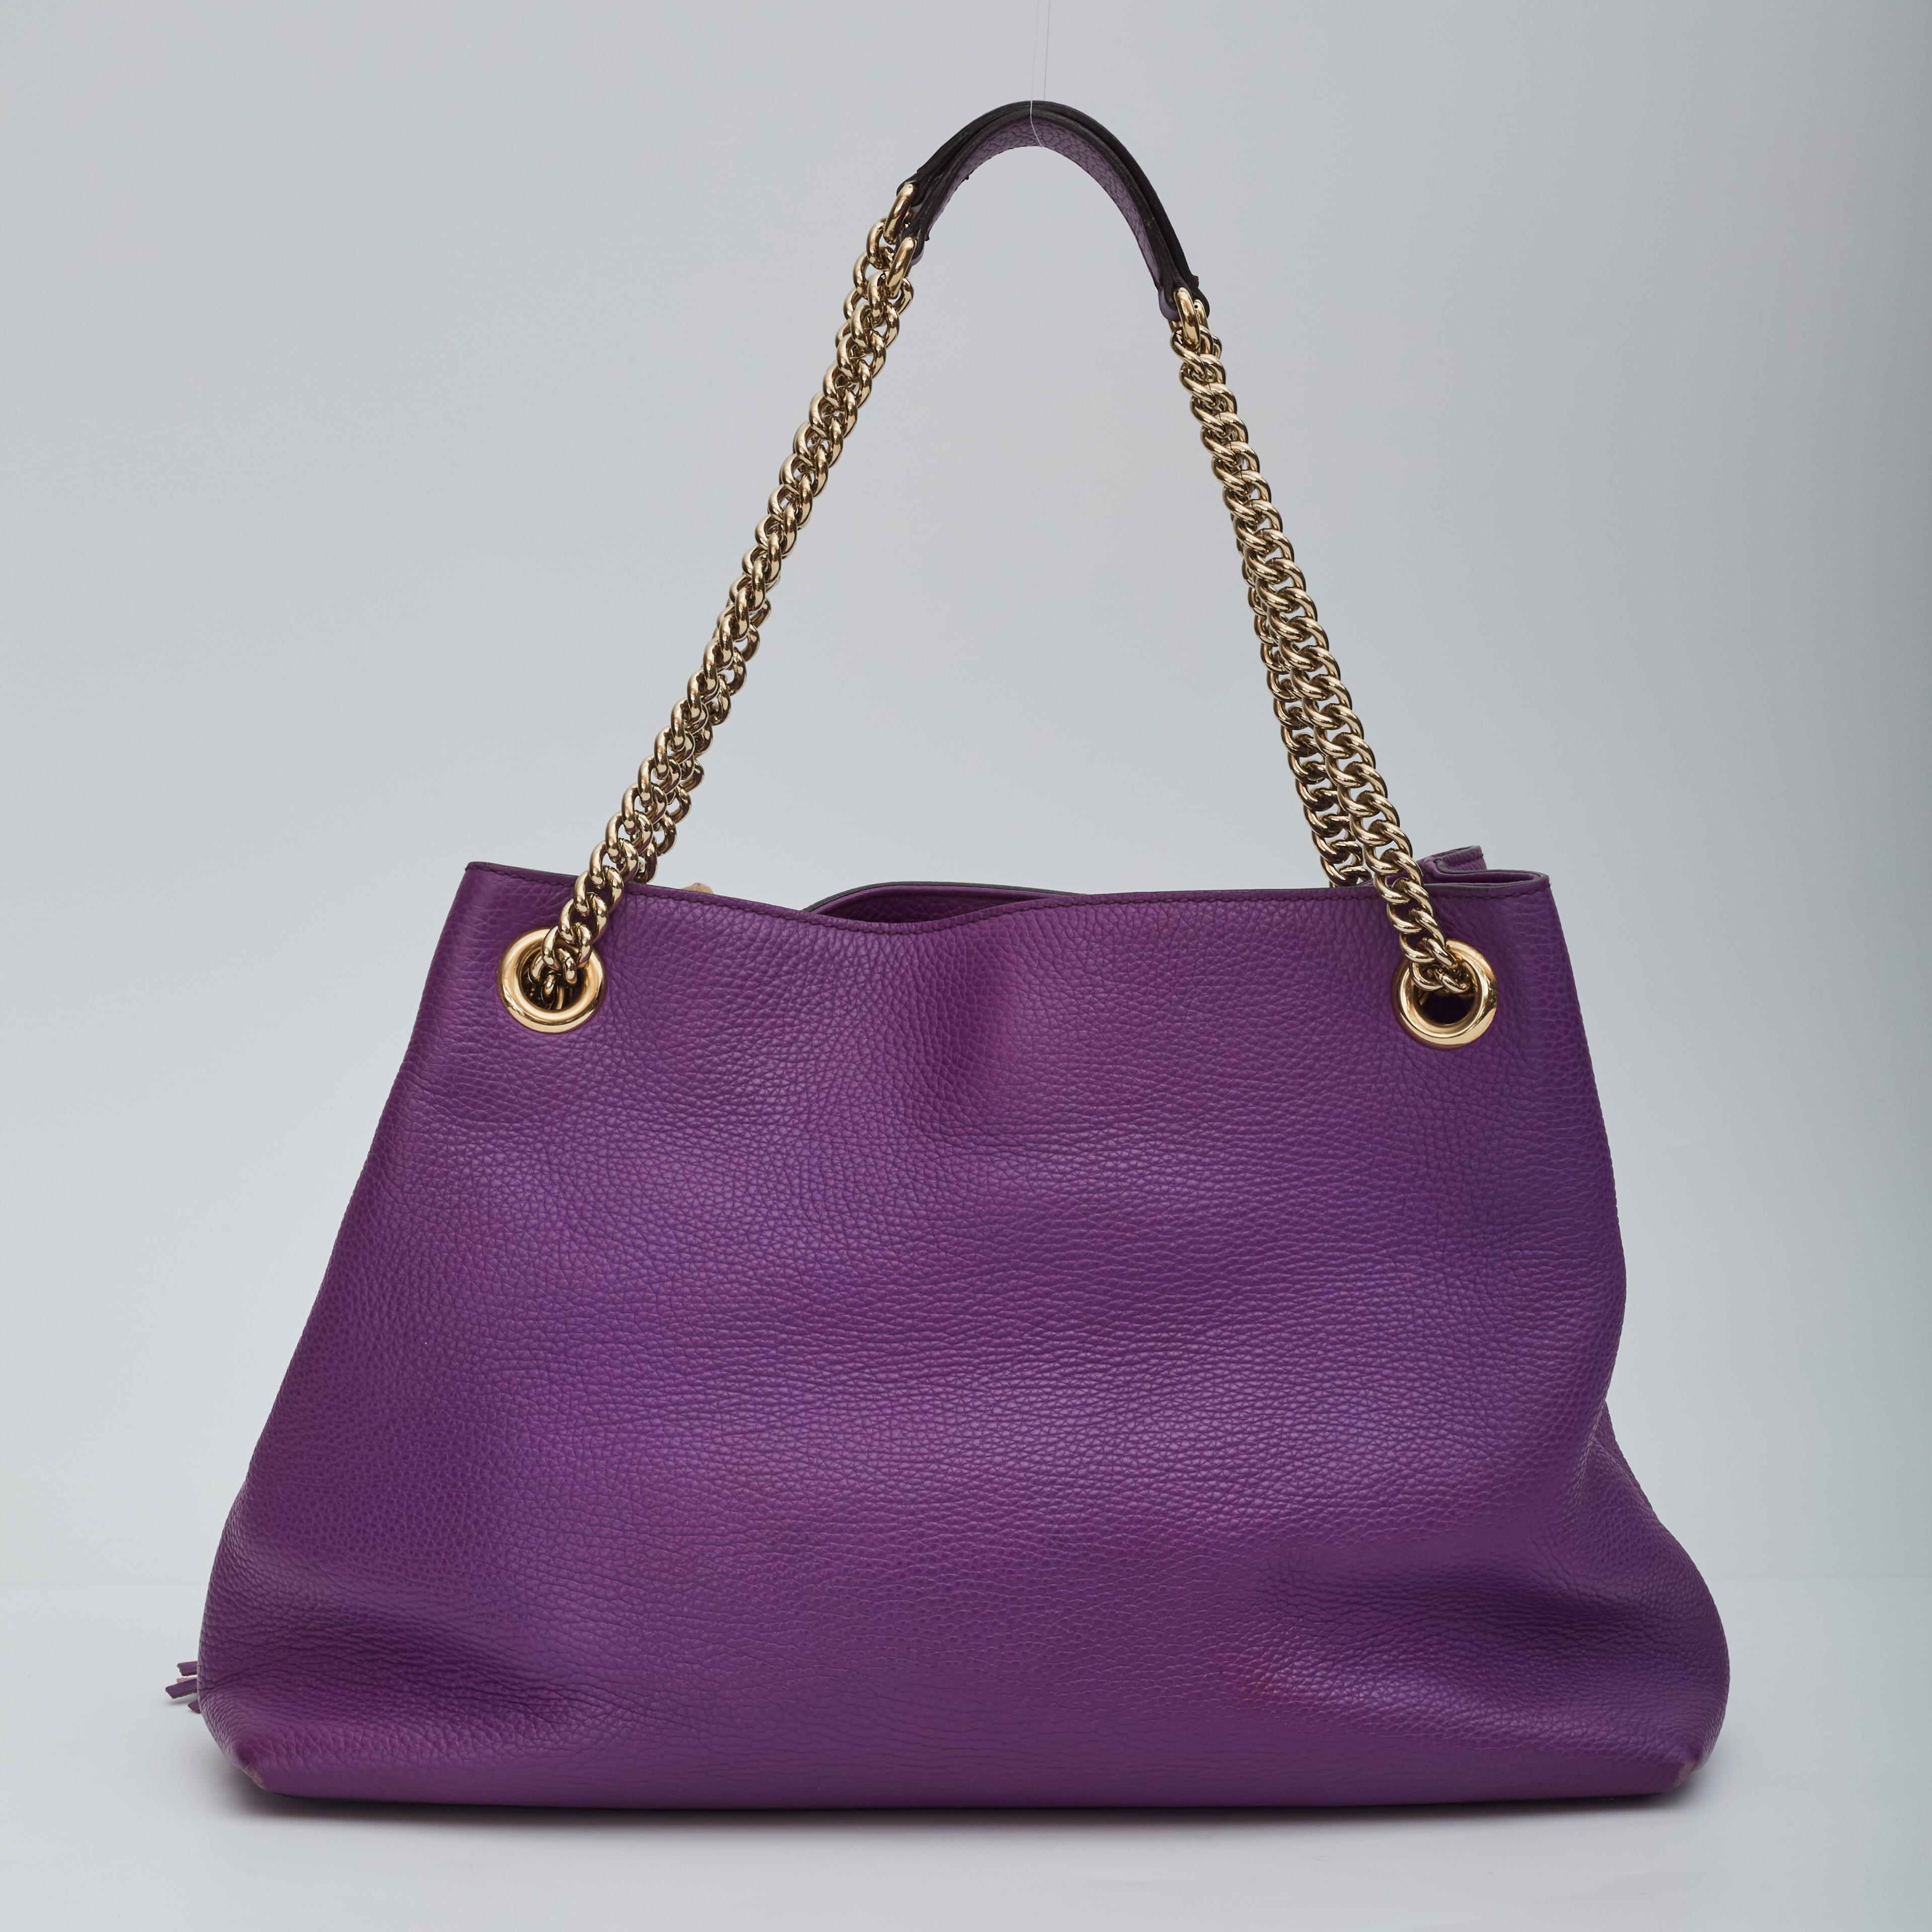 Gucci Pebbled Calfskin Purple Soho Chain Shoulder Bag Medium In Good Condition For Sale In Montreal, Quebec